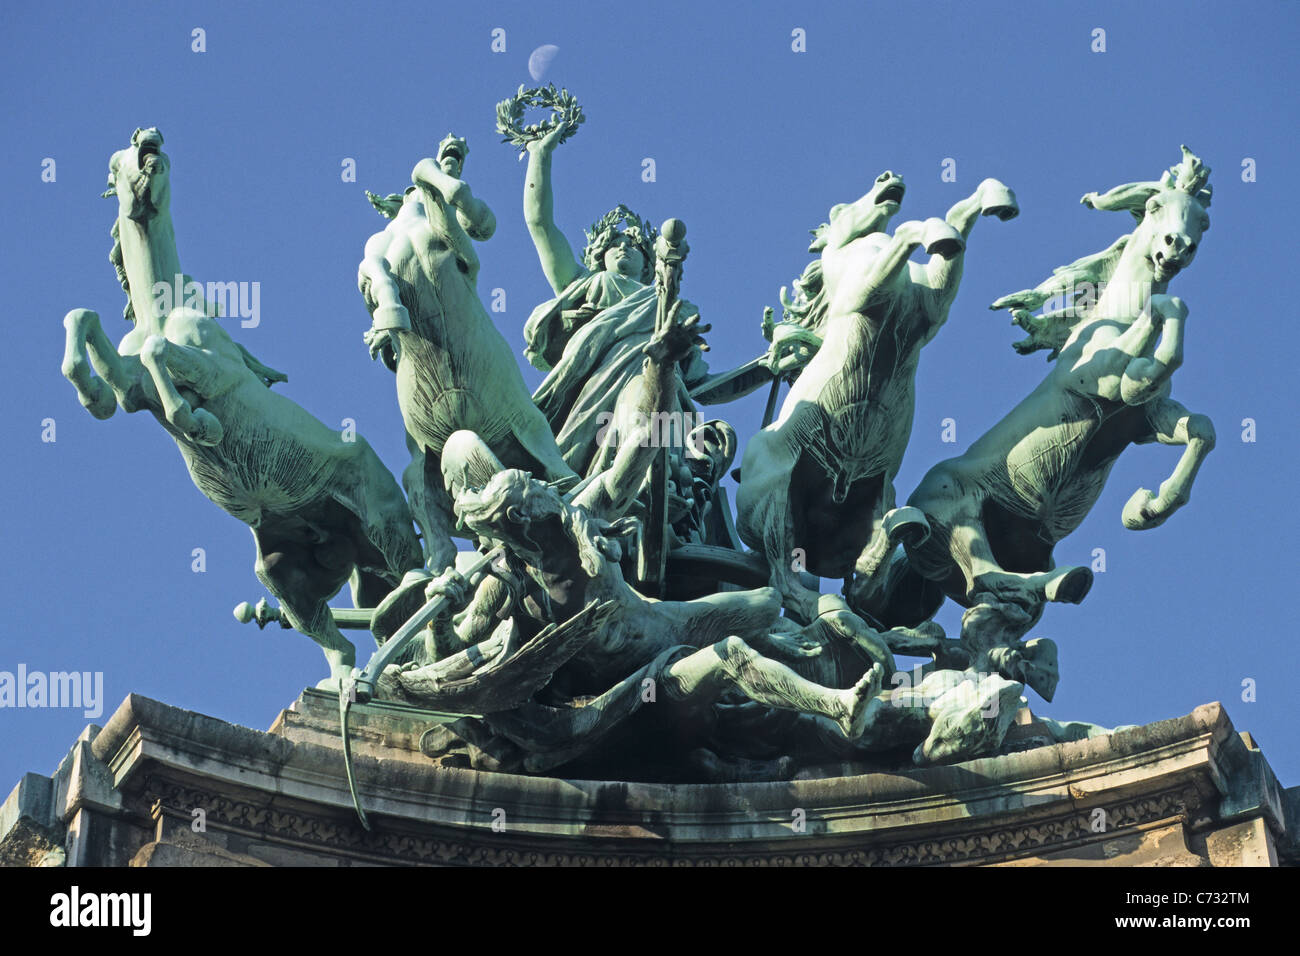 Four horse chariot, quadriga, on the top of the Grand Palais, built for the World Exhibition in 1900, Paris, France Stock Photo